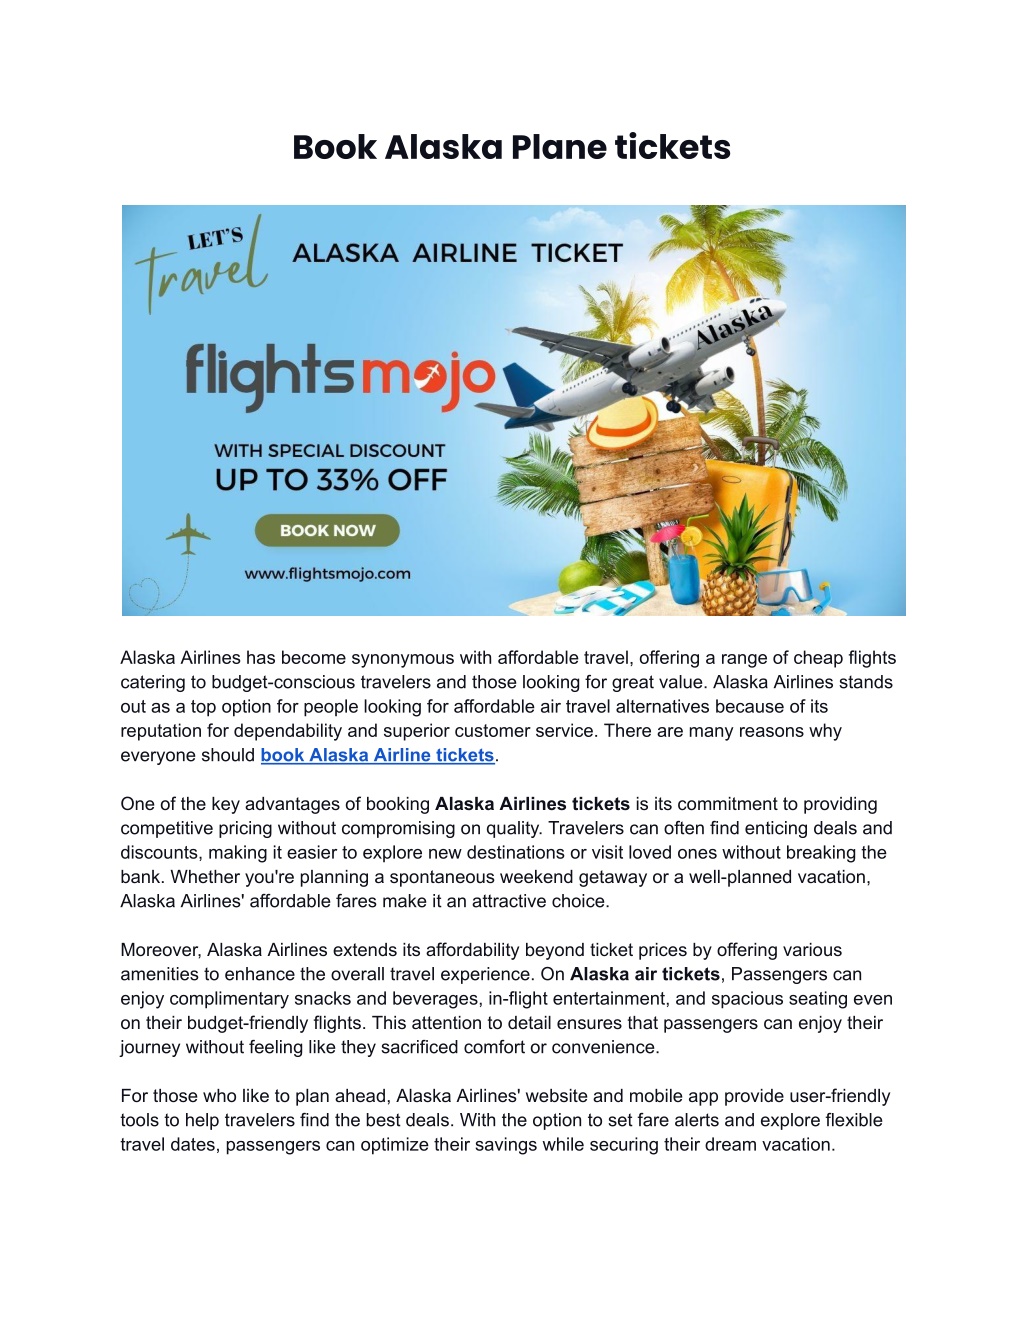 PPT - Alaska Airlines tickets PowerPoint Presentation, free download ...